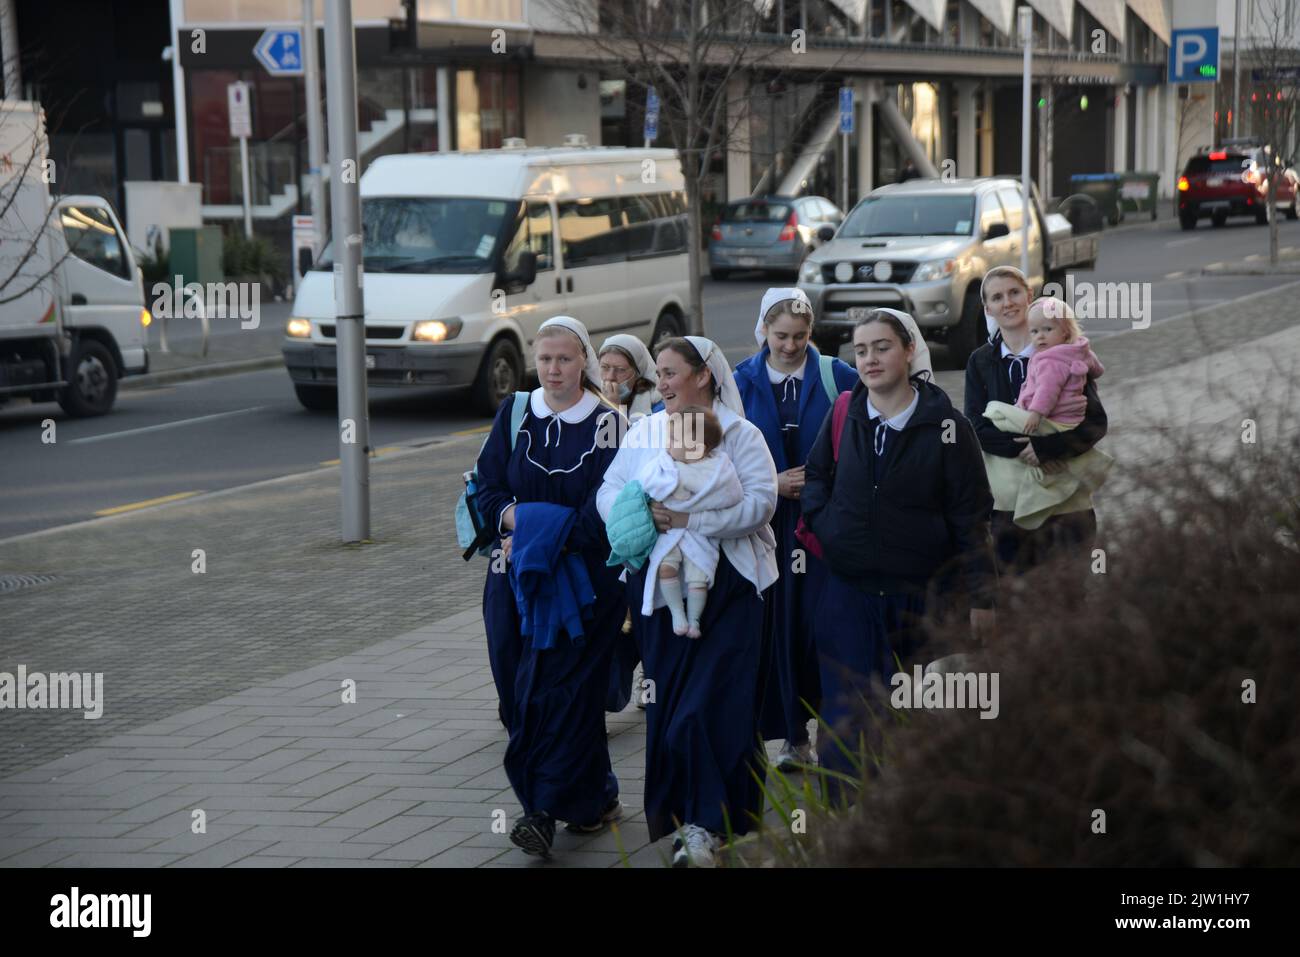 CHRISTCHURCH, NEW ZEALAND, AUGUST 29, 2022: Members of the Gloriavale Christian Community approach the Justice Precinct building in Christchurch where a hearing was underway over the employment status of women in the community. Stock Photo